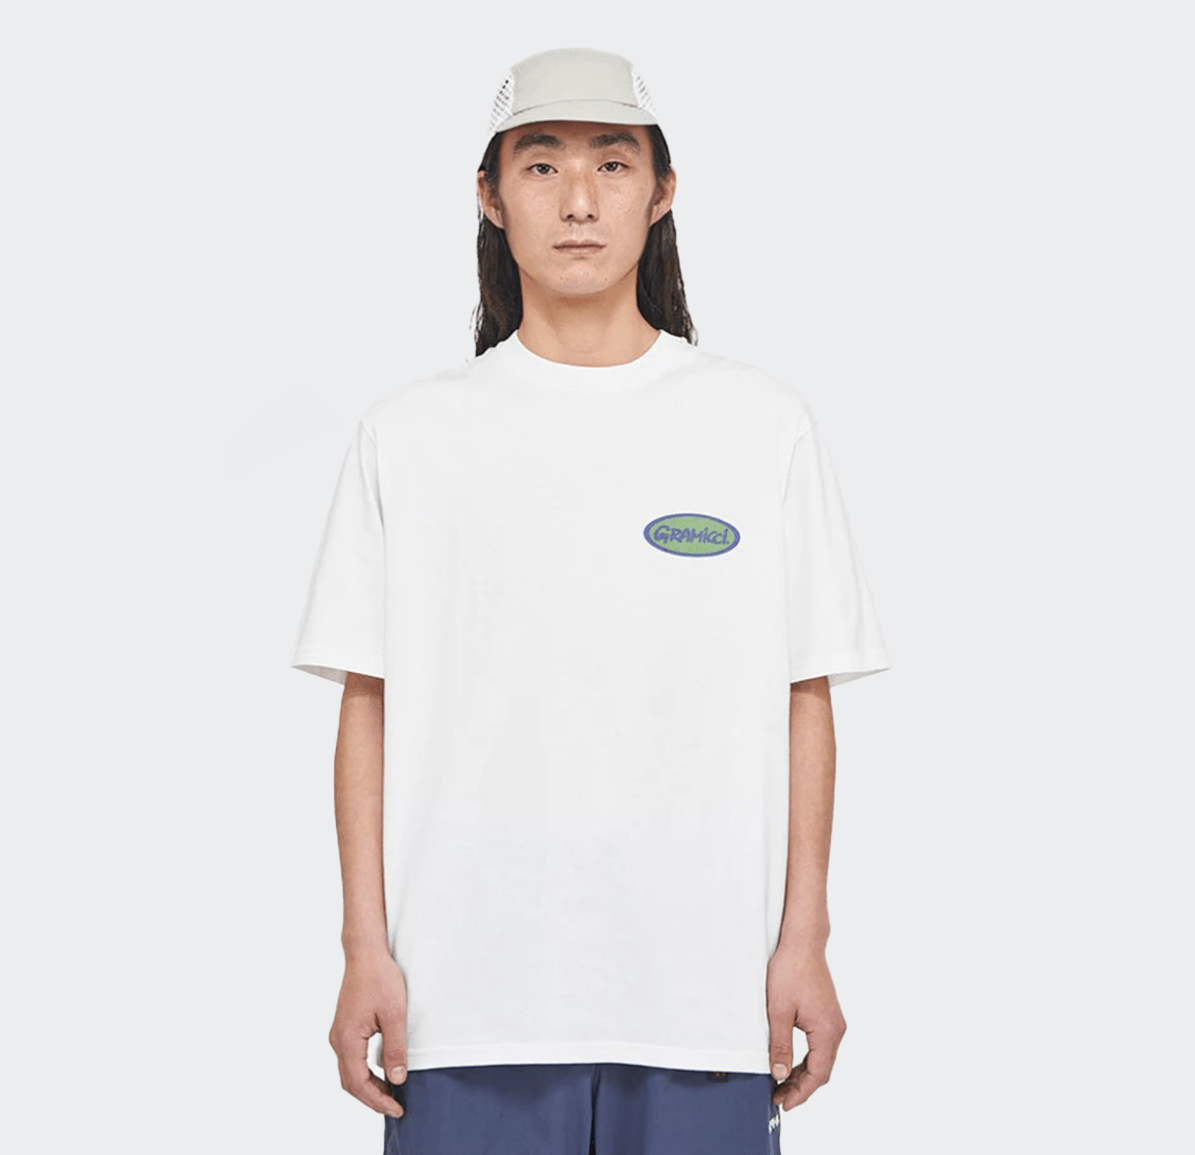 Gramicci Short Sleeve Oval Tee Shirt - White - Gramicci - State Of Play